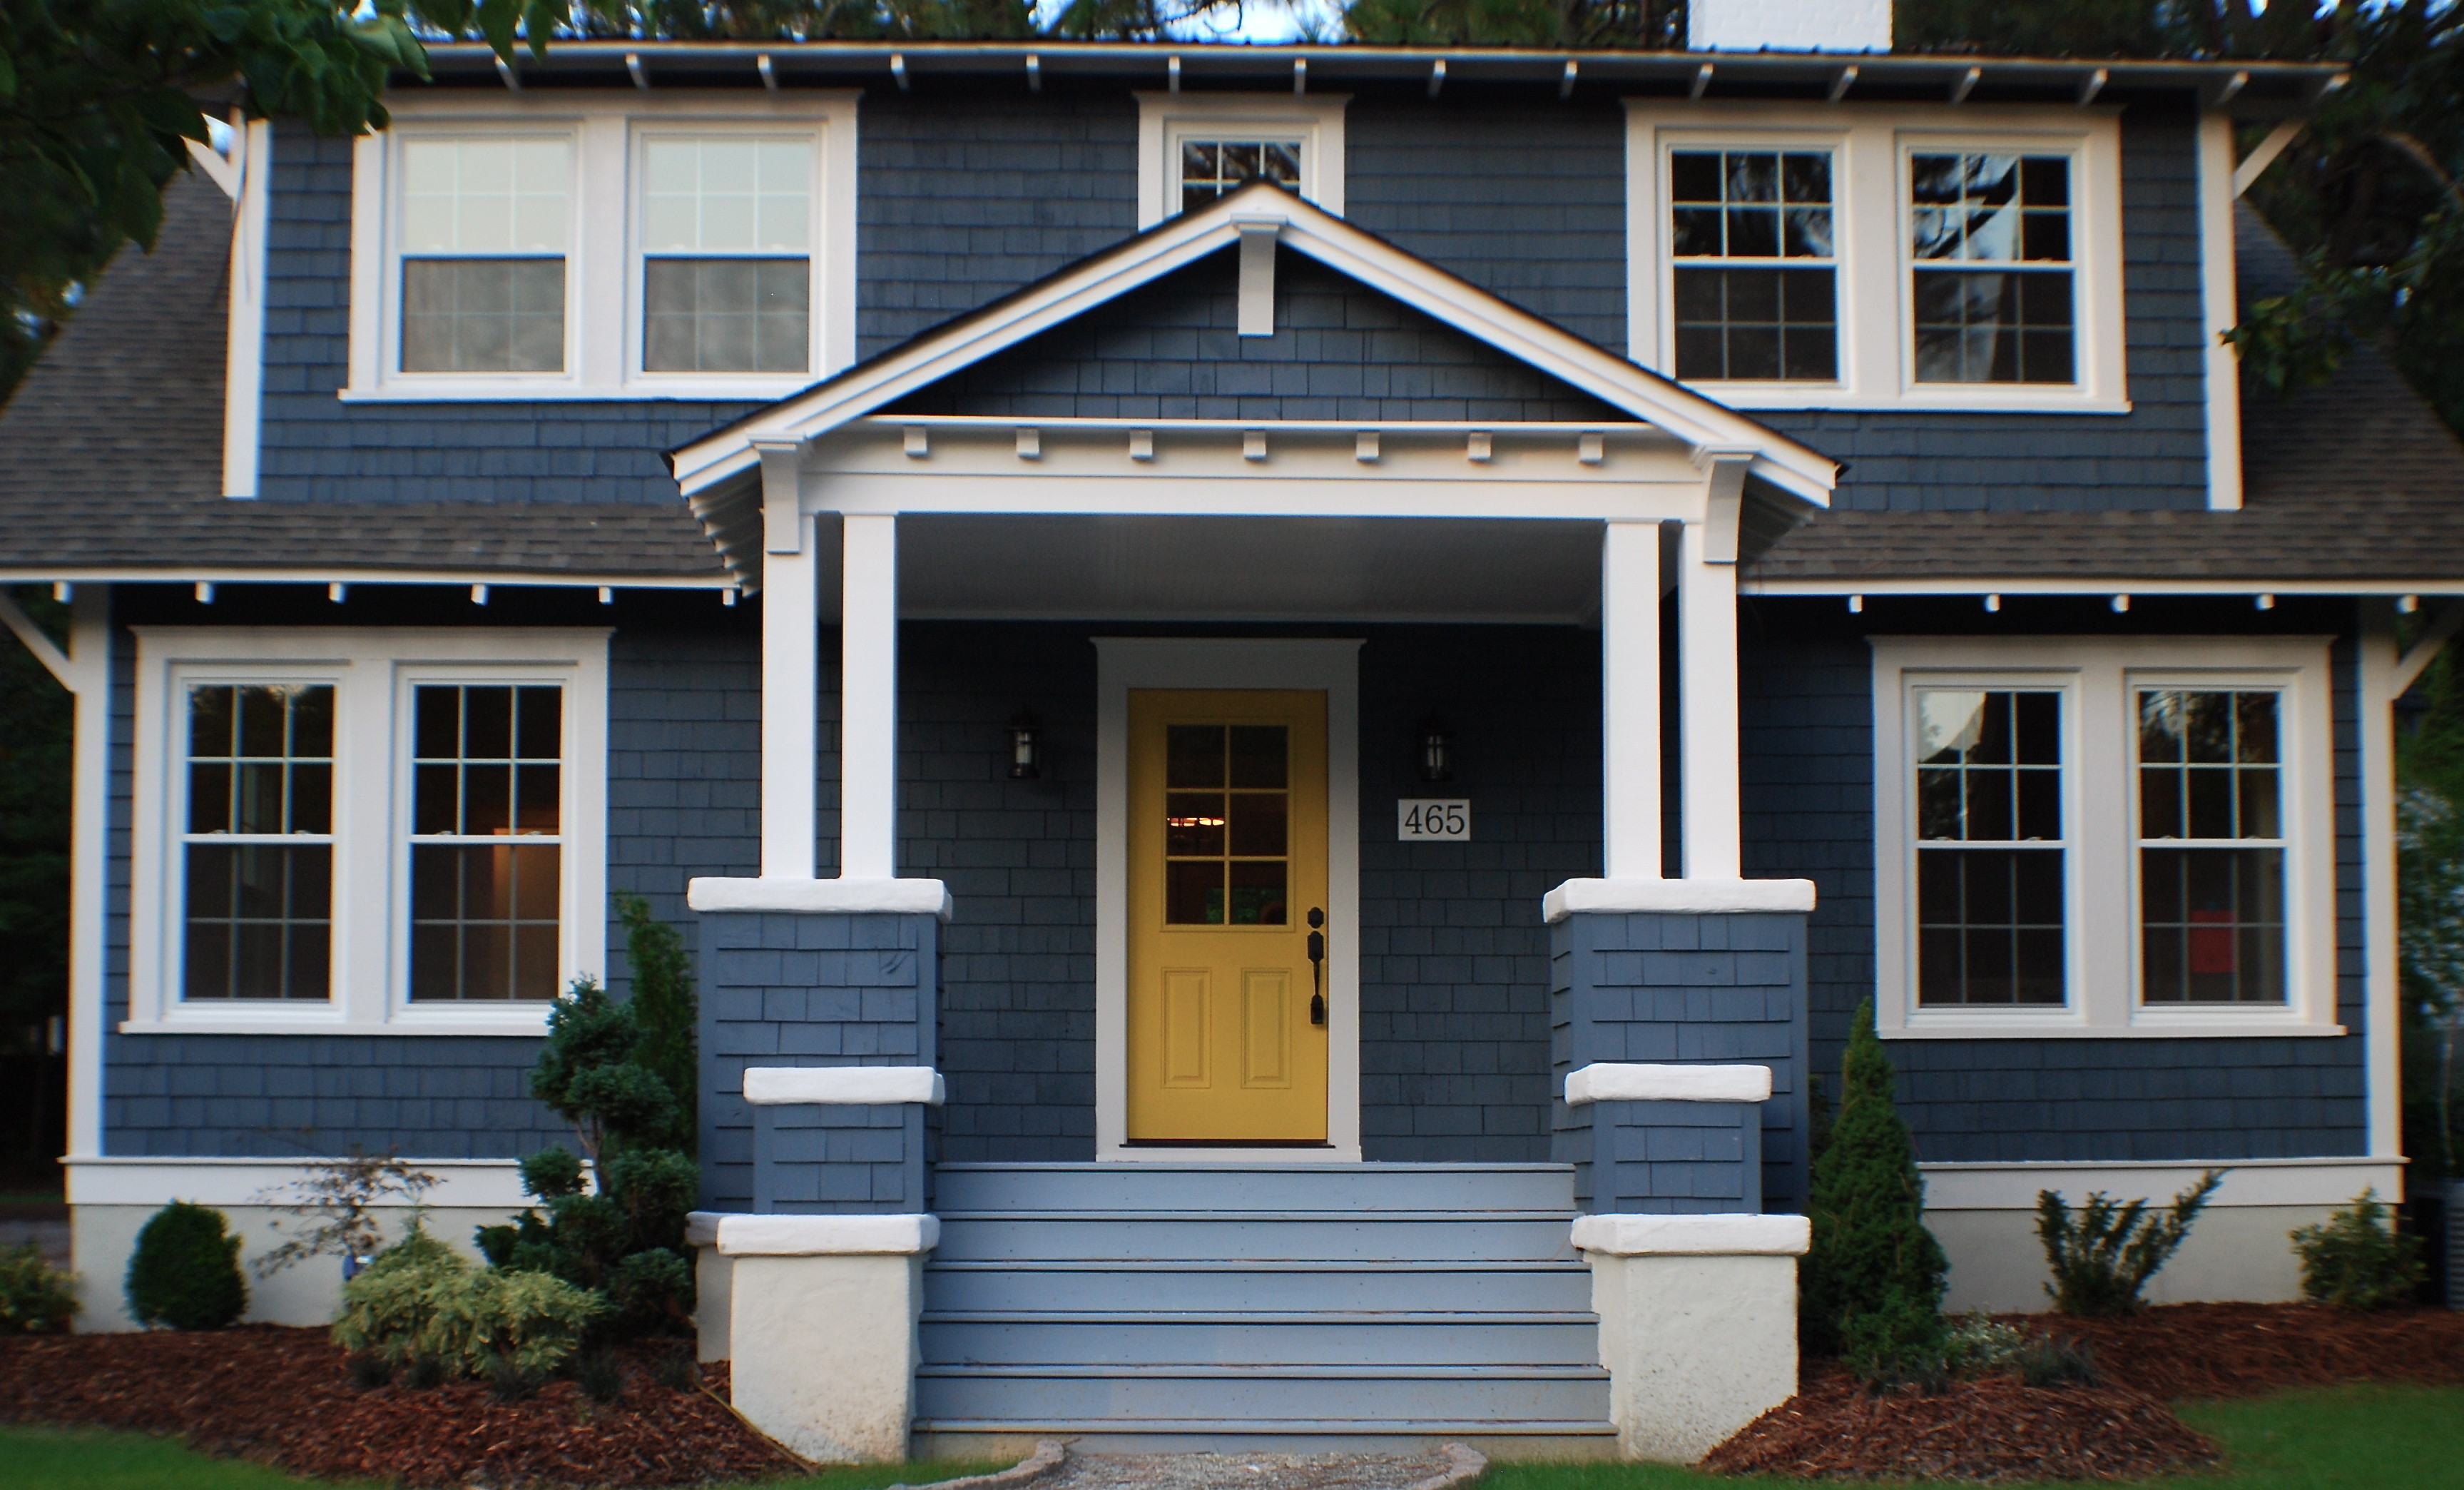 This Sunny Yellow Entry Proves The Power Of Curb Appeal Huffpost Life